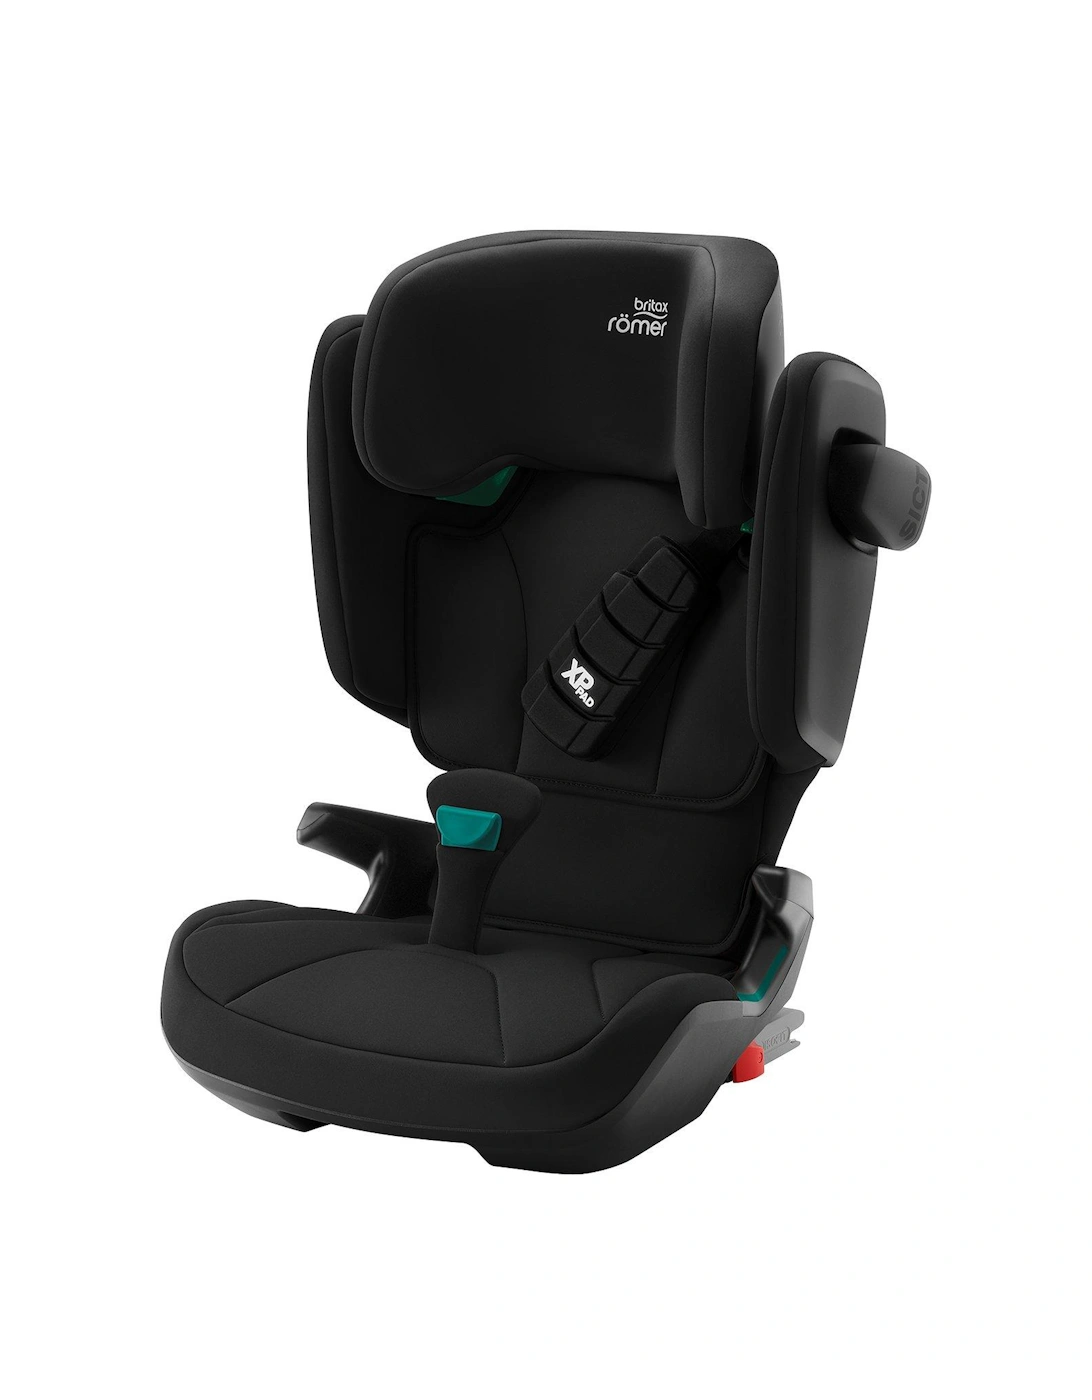 Romer KIDFIX i-SIZE Car Seat 3.5 to 12 years approx - Child (Group 2-3)- Cosmos Black, 3 of 2